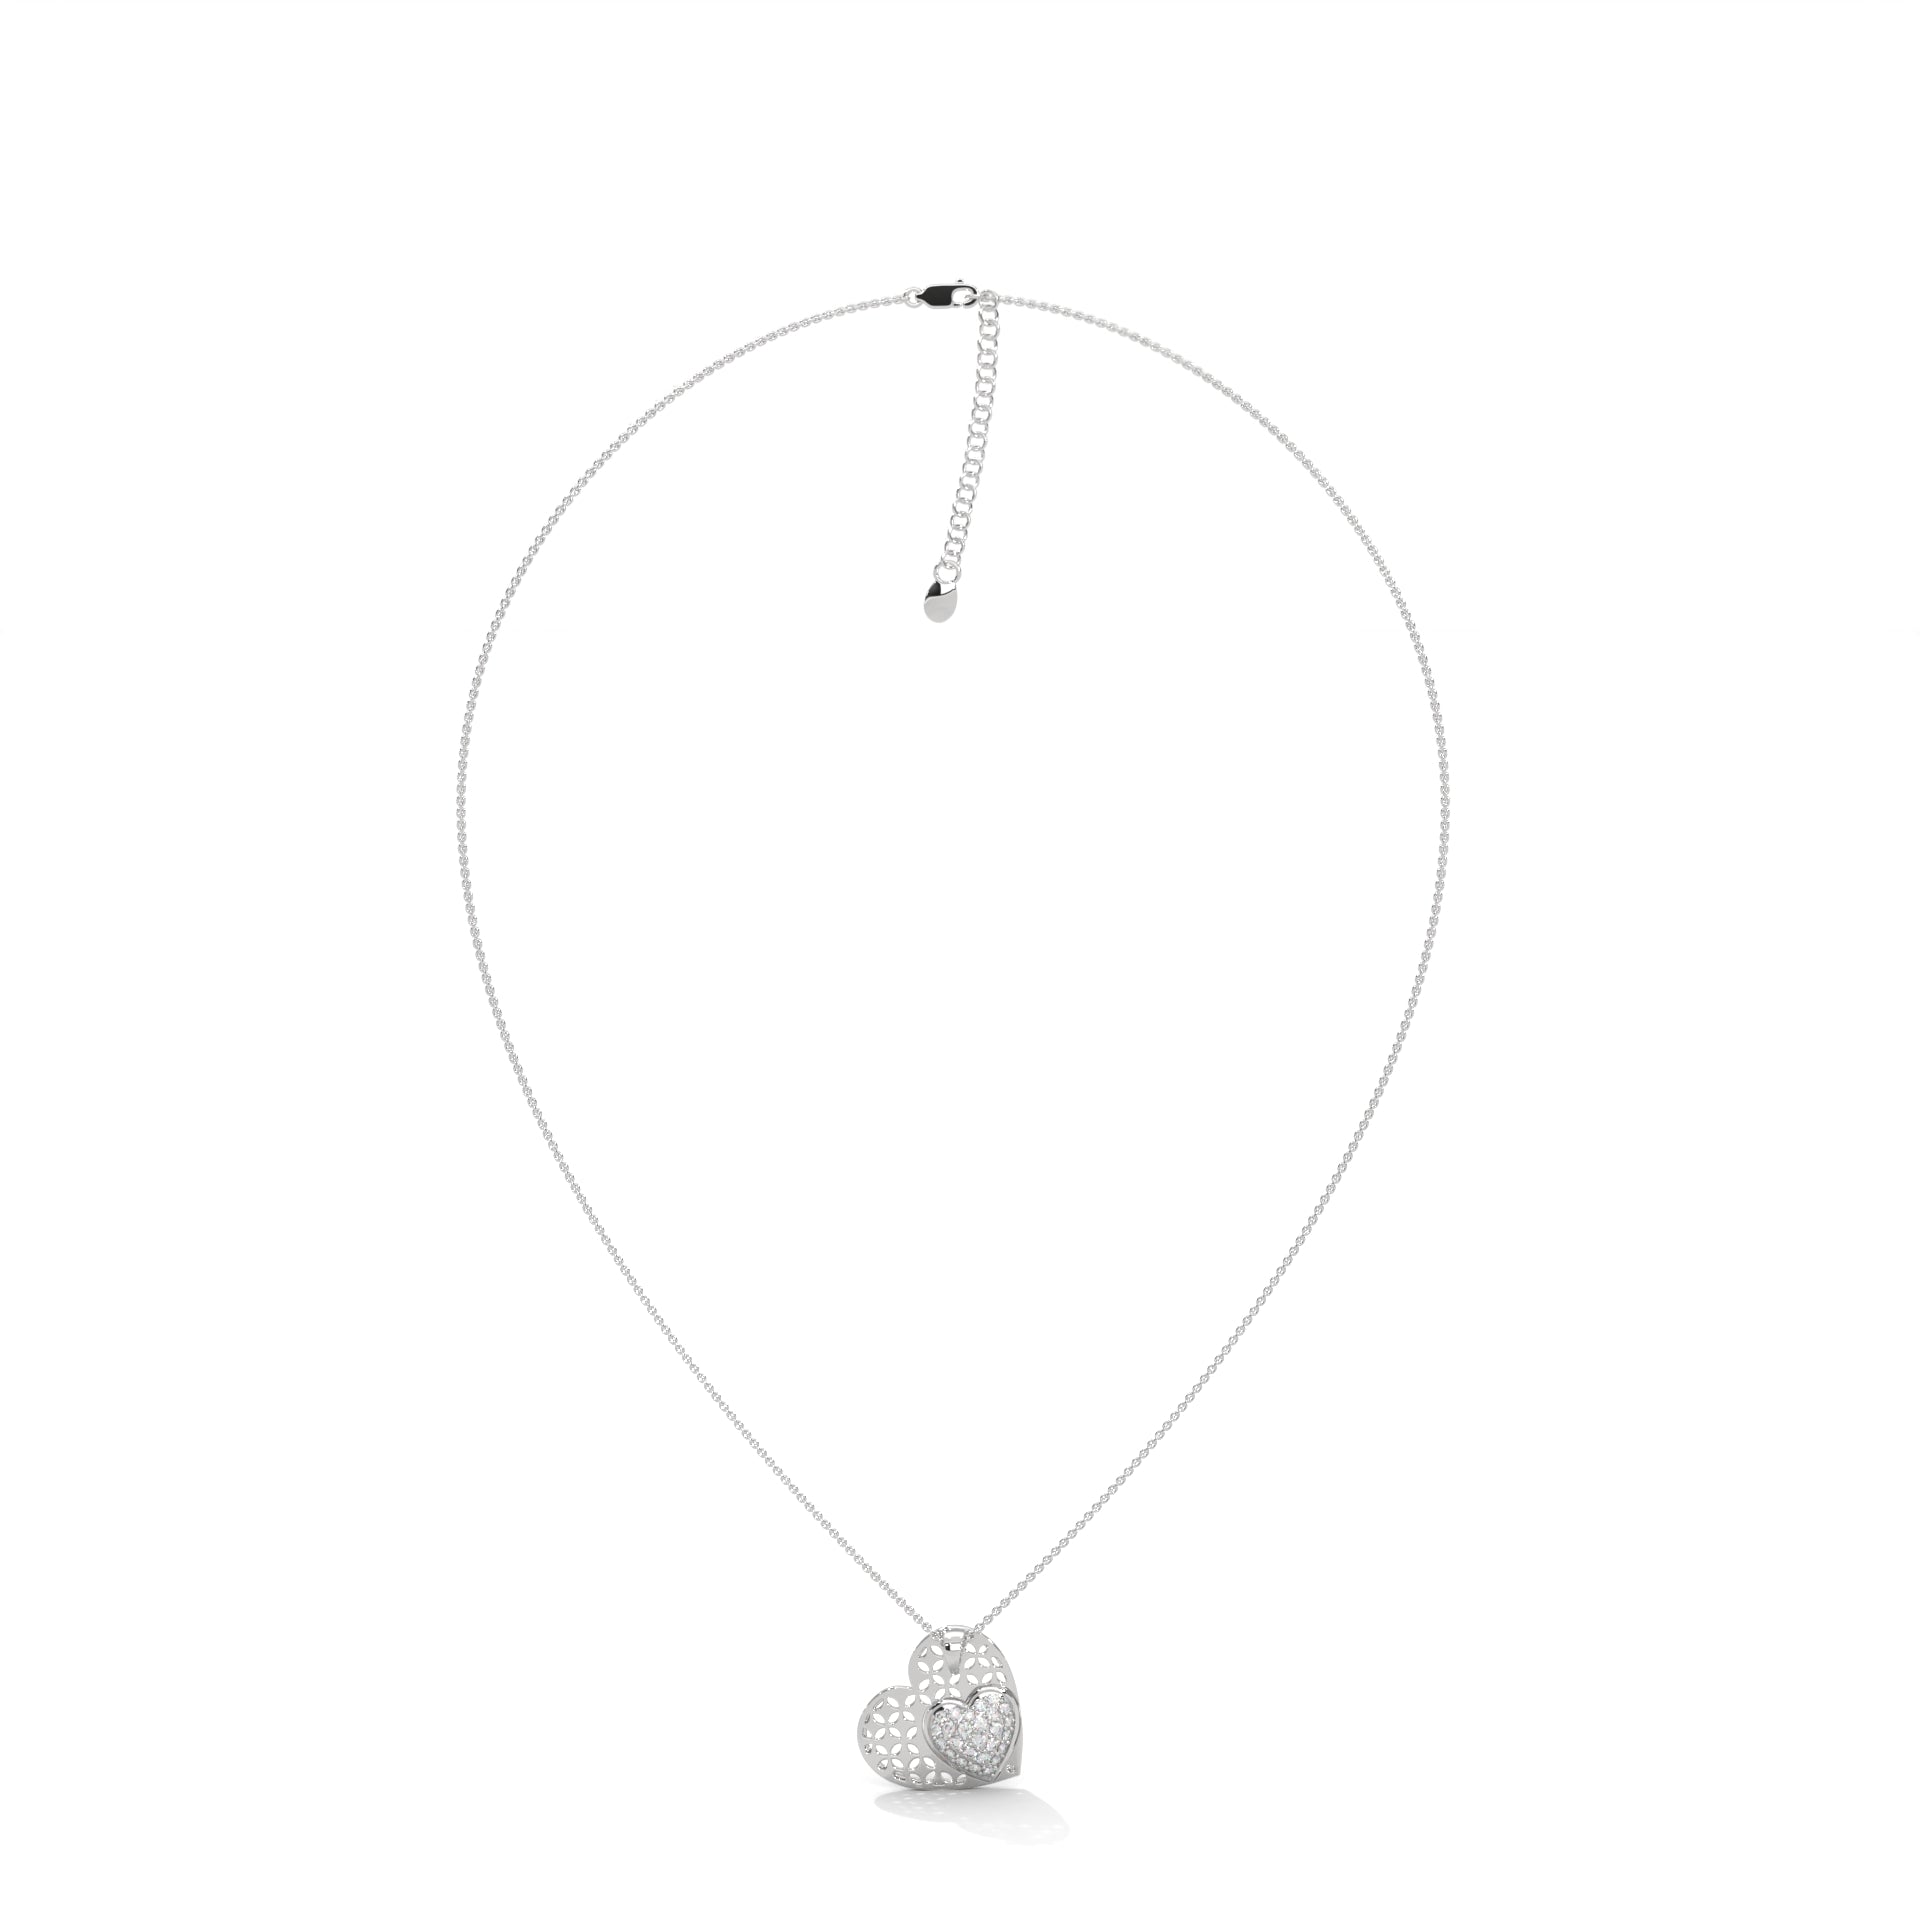 Captivating 925 Sterling Silver Chain with Pendant Sets: Adorn Yourself with Timeless Elegance